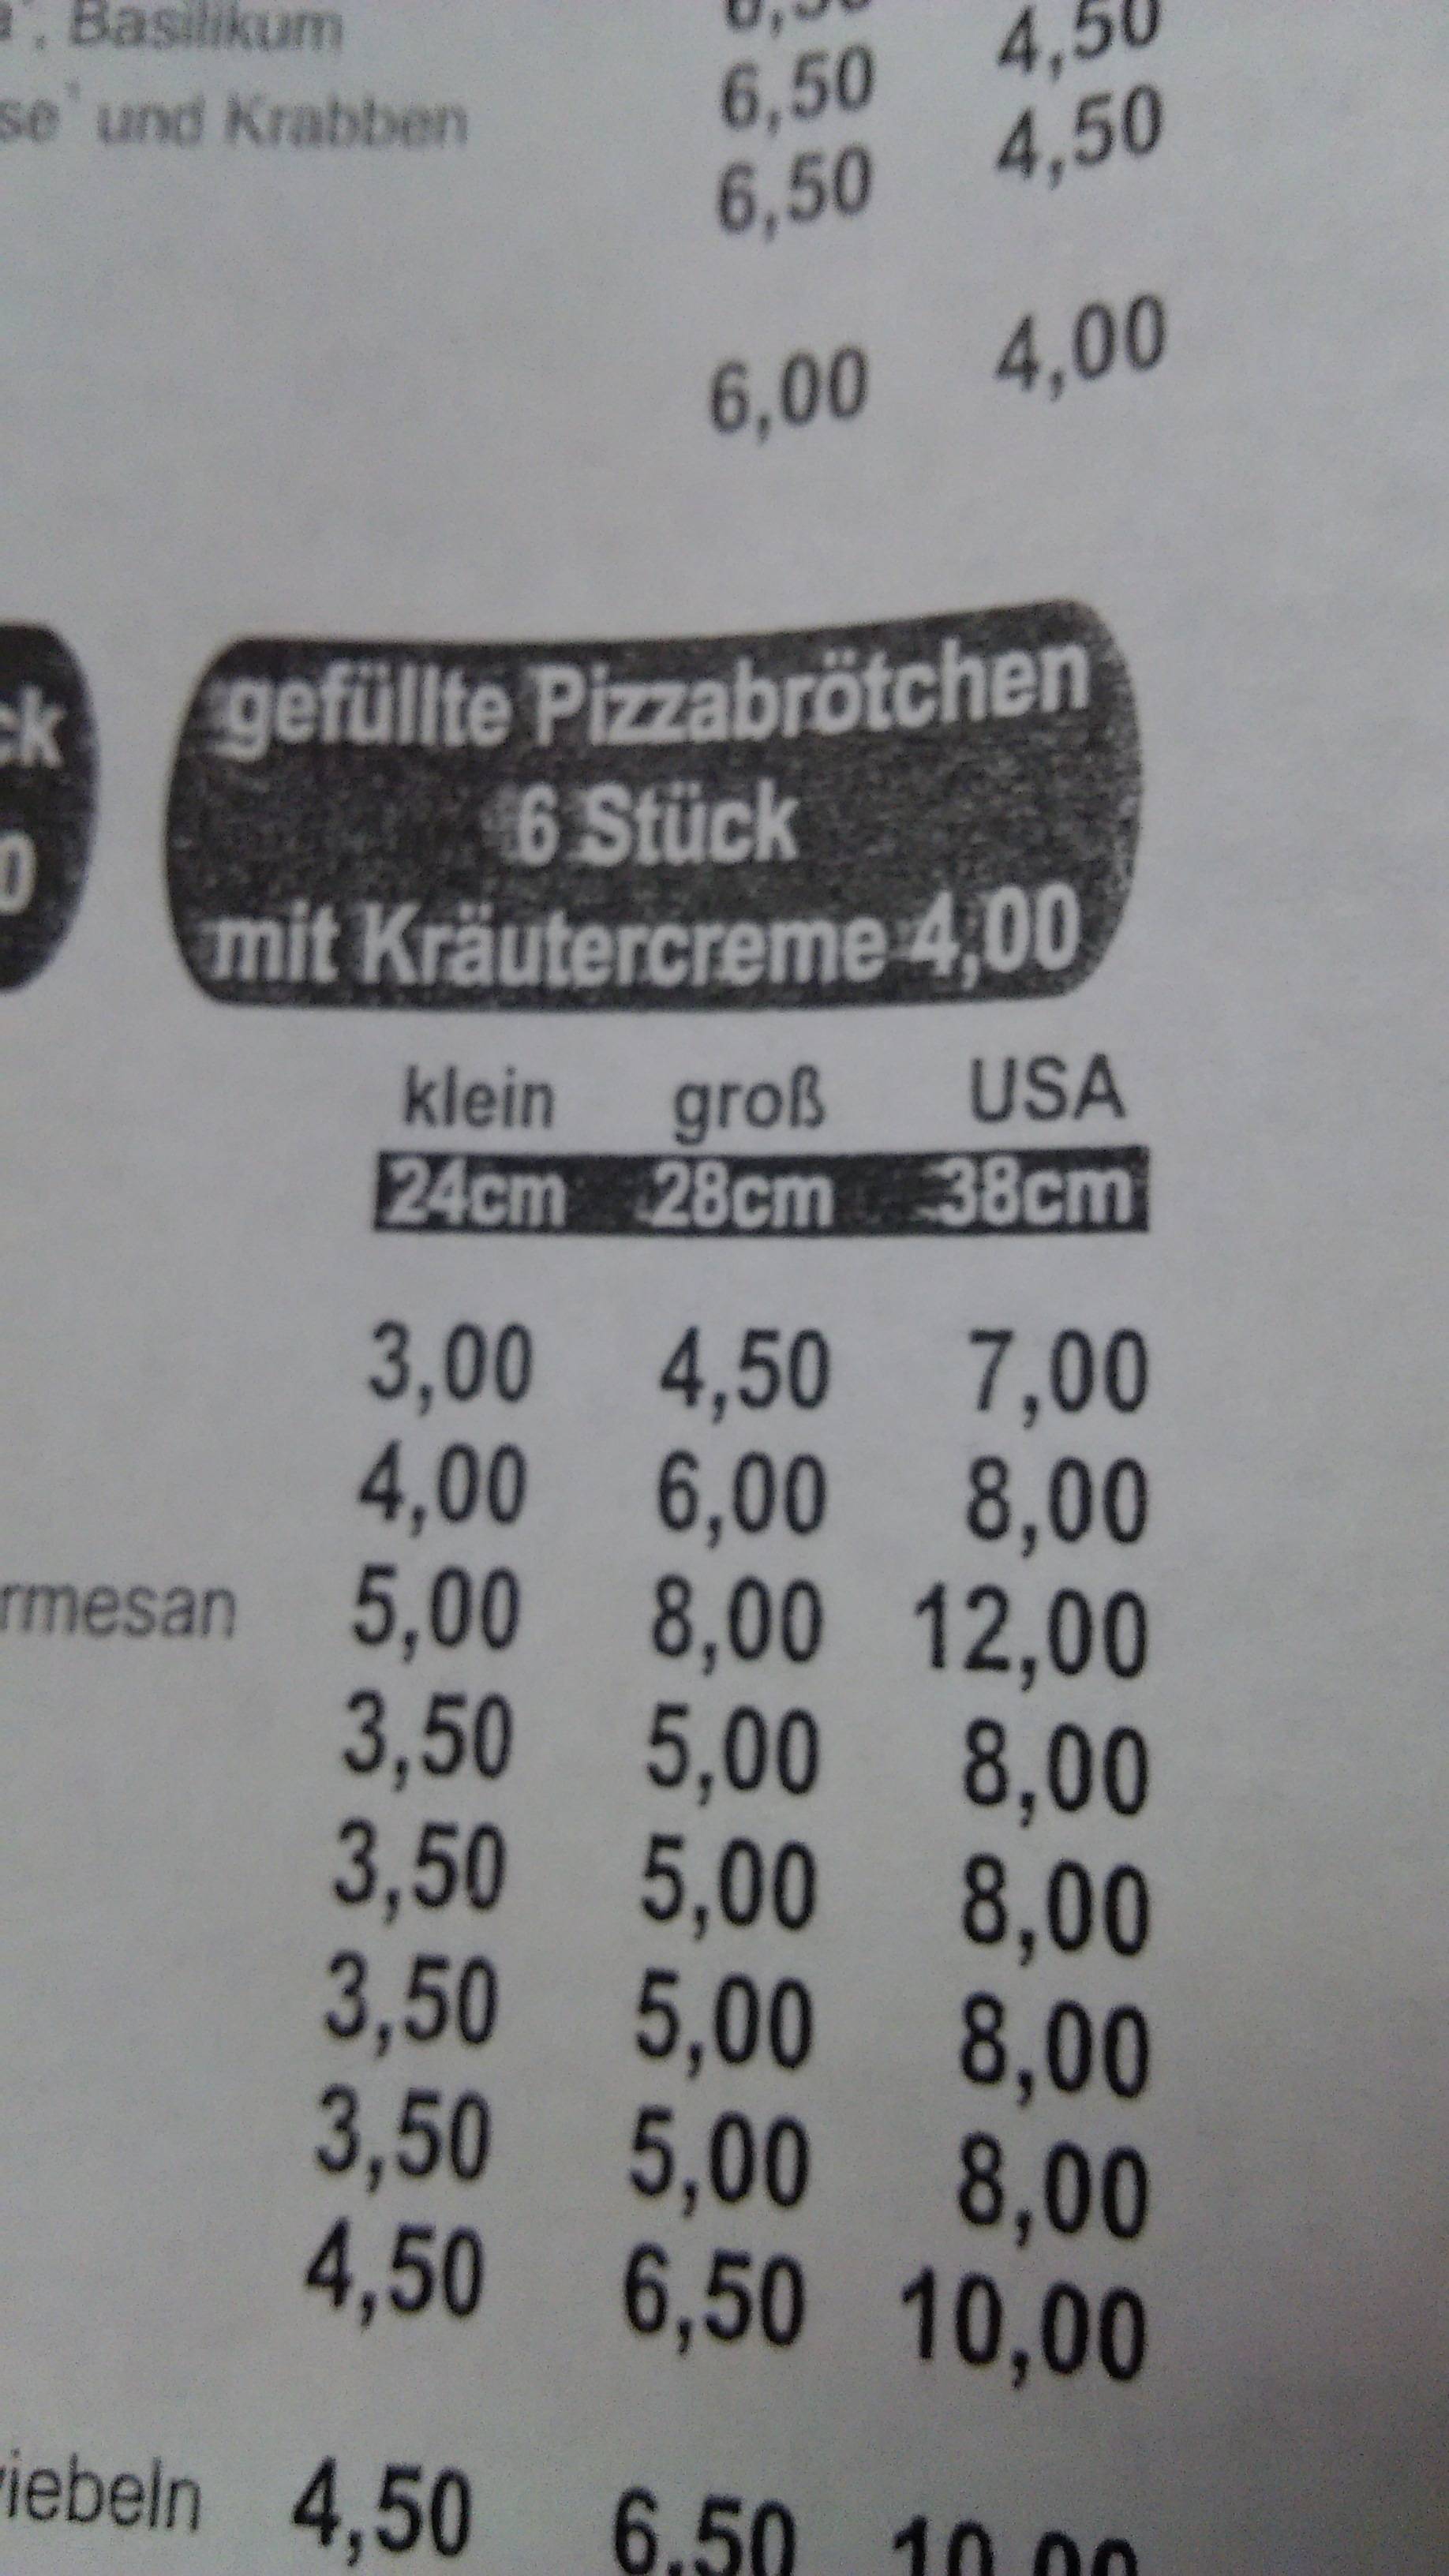 Germany doing it's best to insult the US with pizza sizes. Small-Large-USA